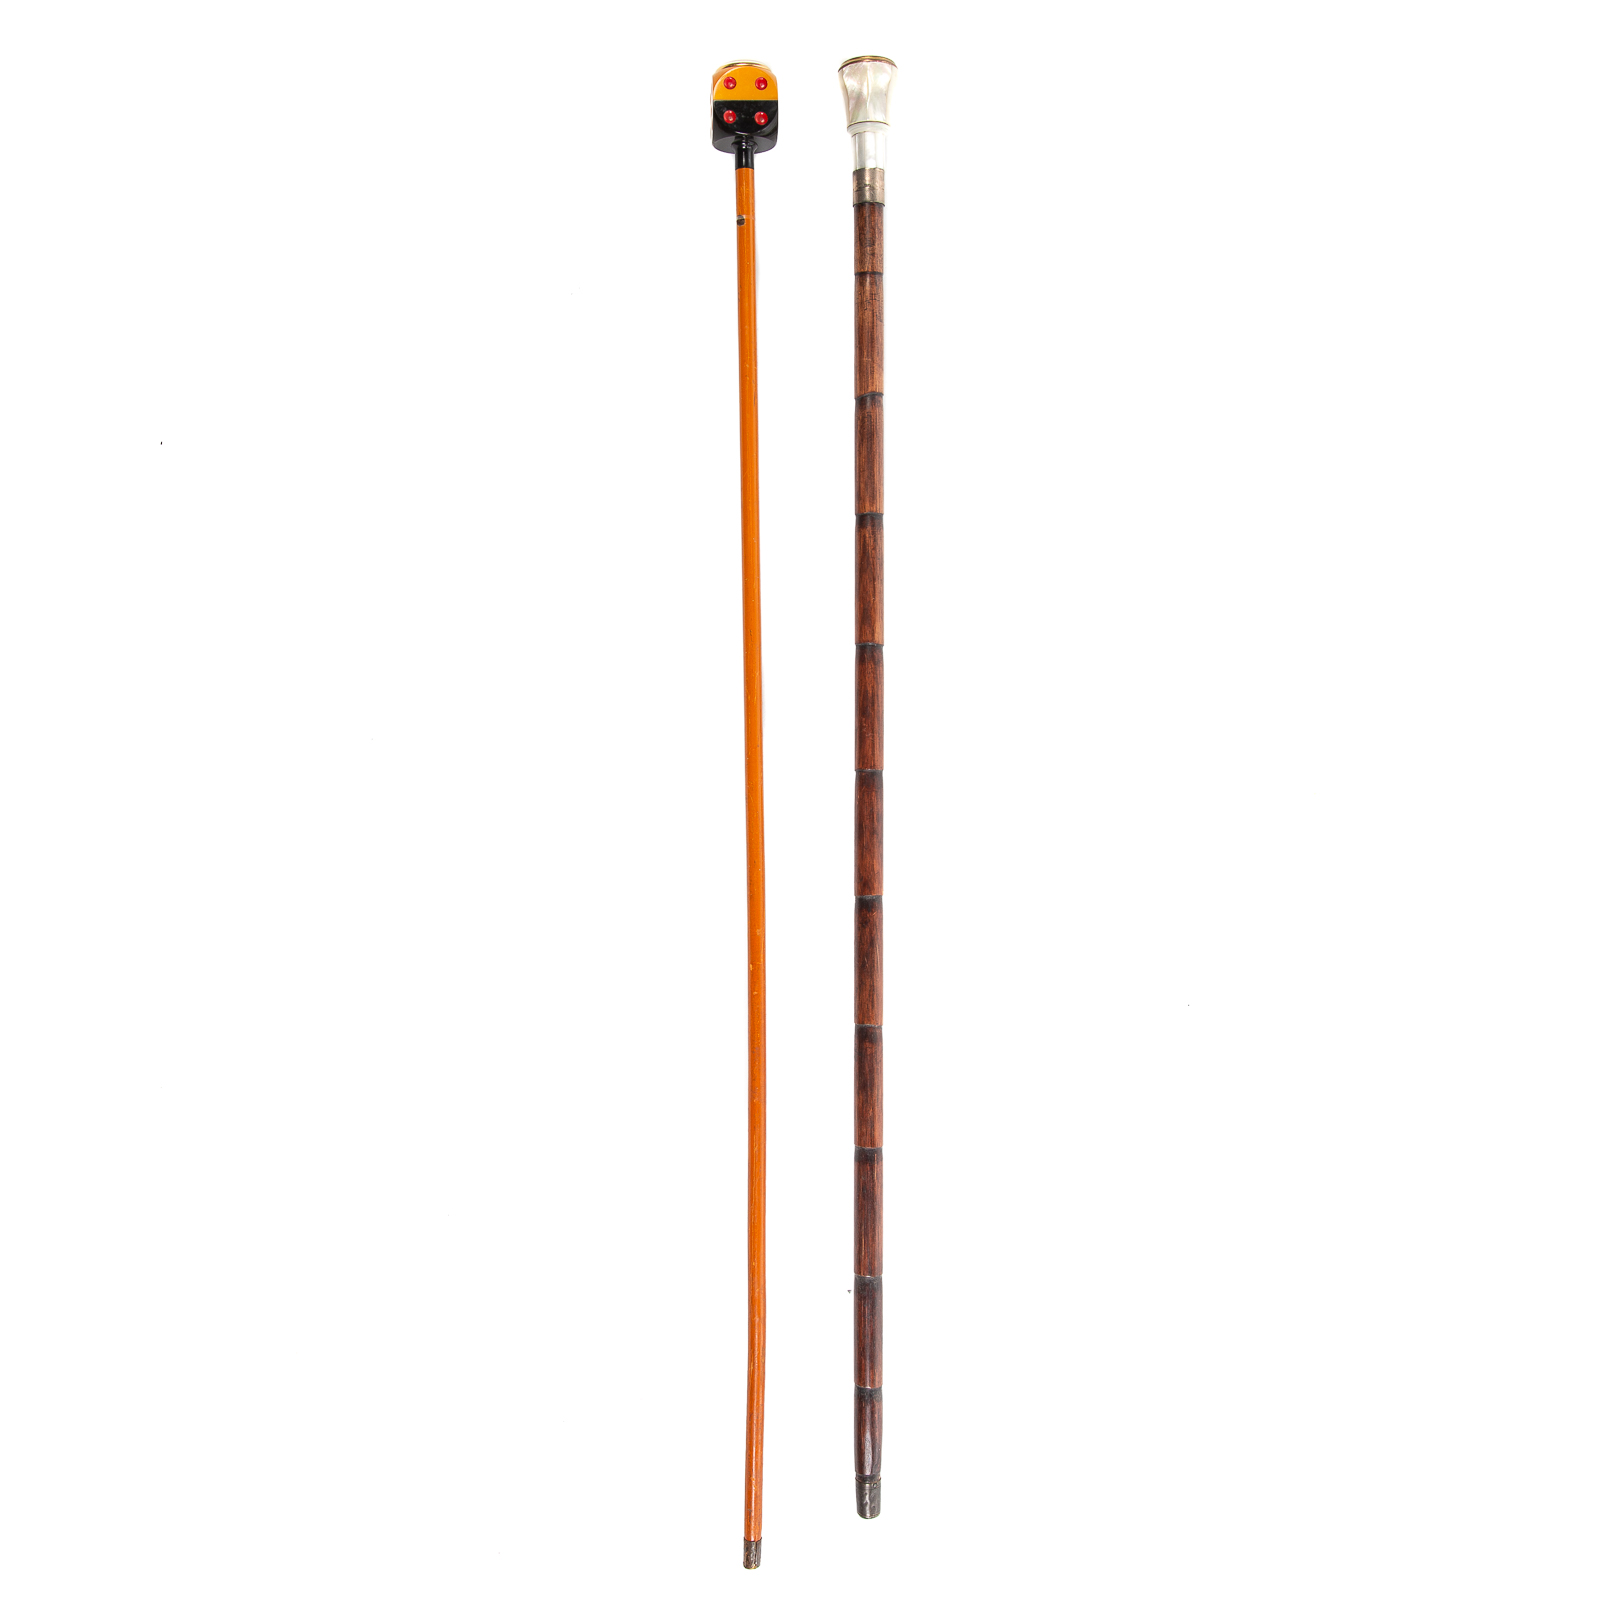 TWO GADGET CANES 20th century  33876a